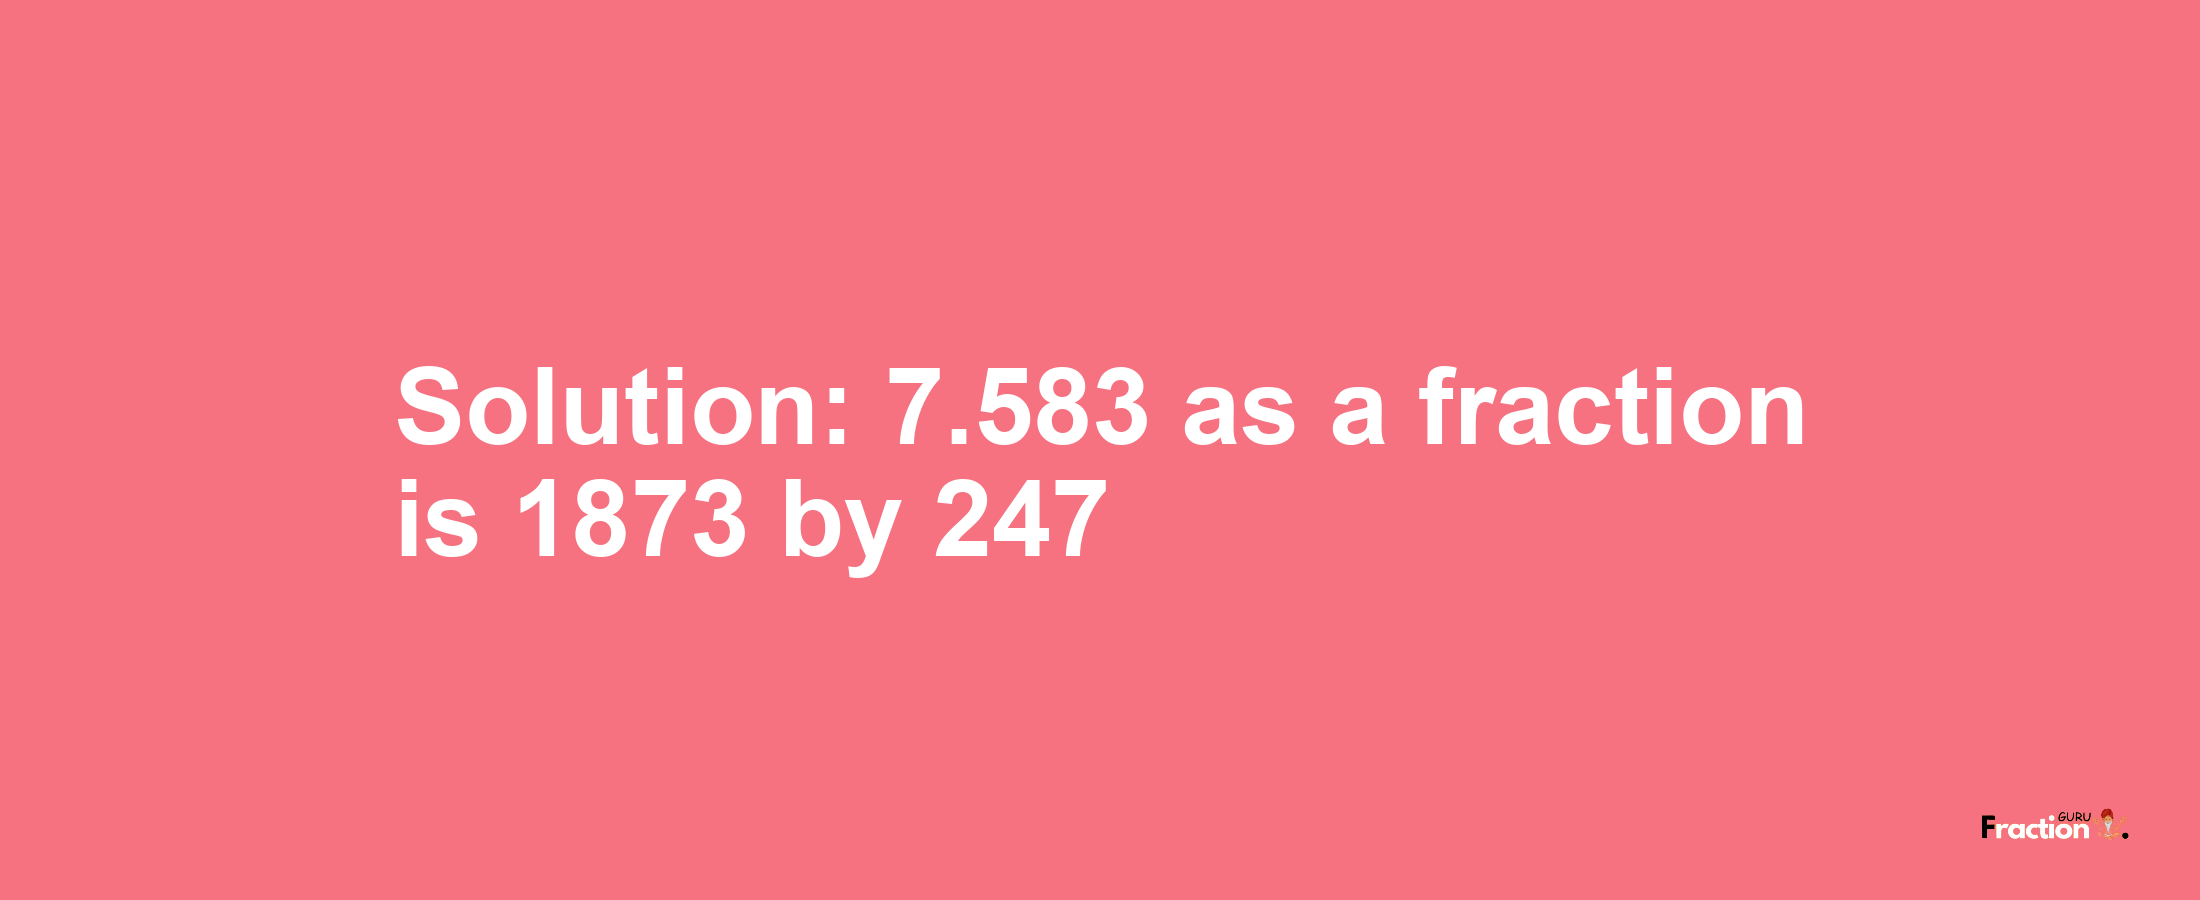 Solution:7.583 as a fraction is 1873/247